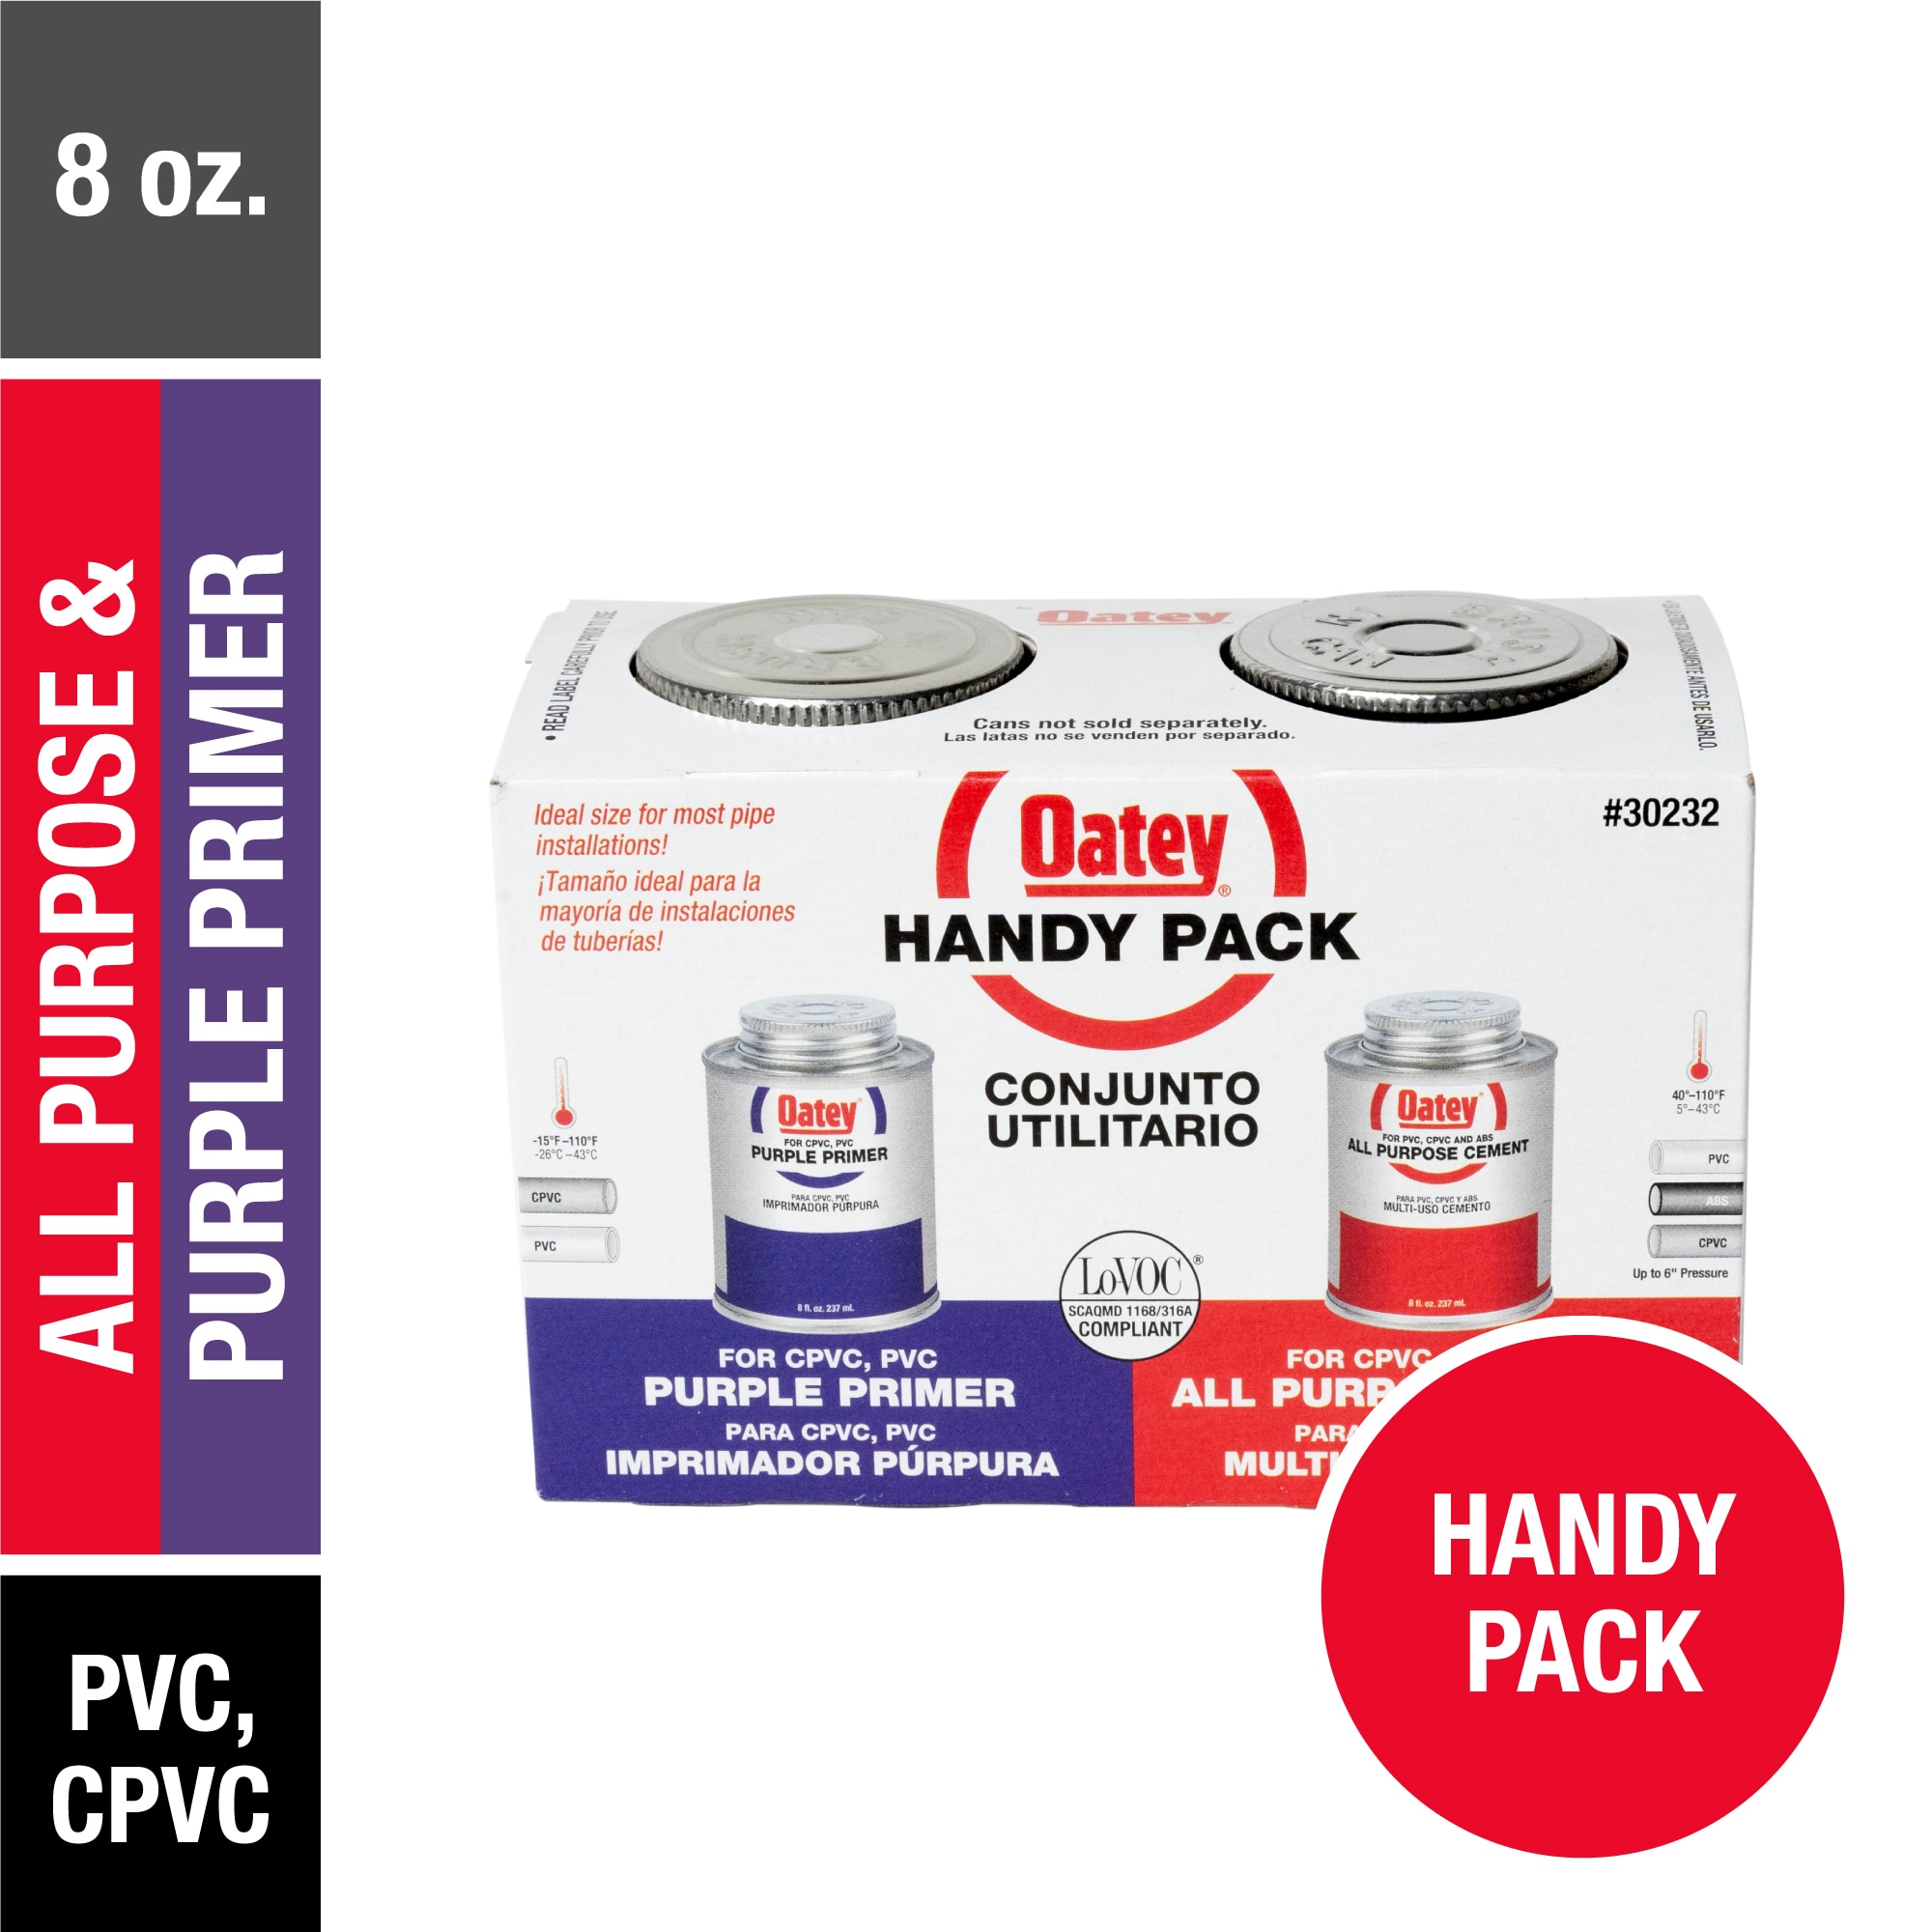 Oatey Handy Pack oz Purple and All-purpose Cement and Primer in the Cements, Primers & Cleaners department at Lowes.com